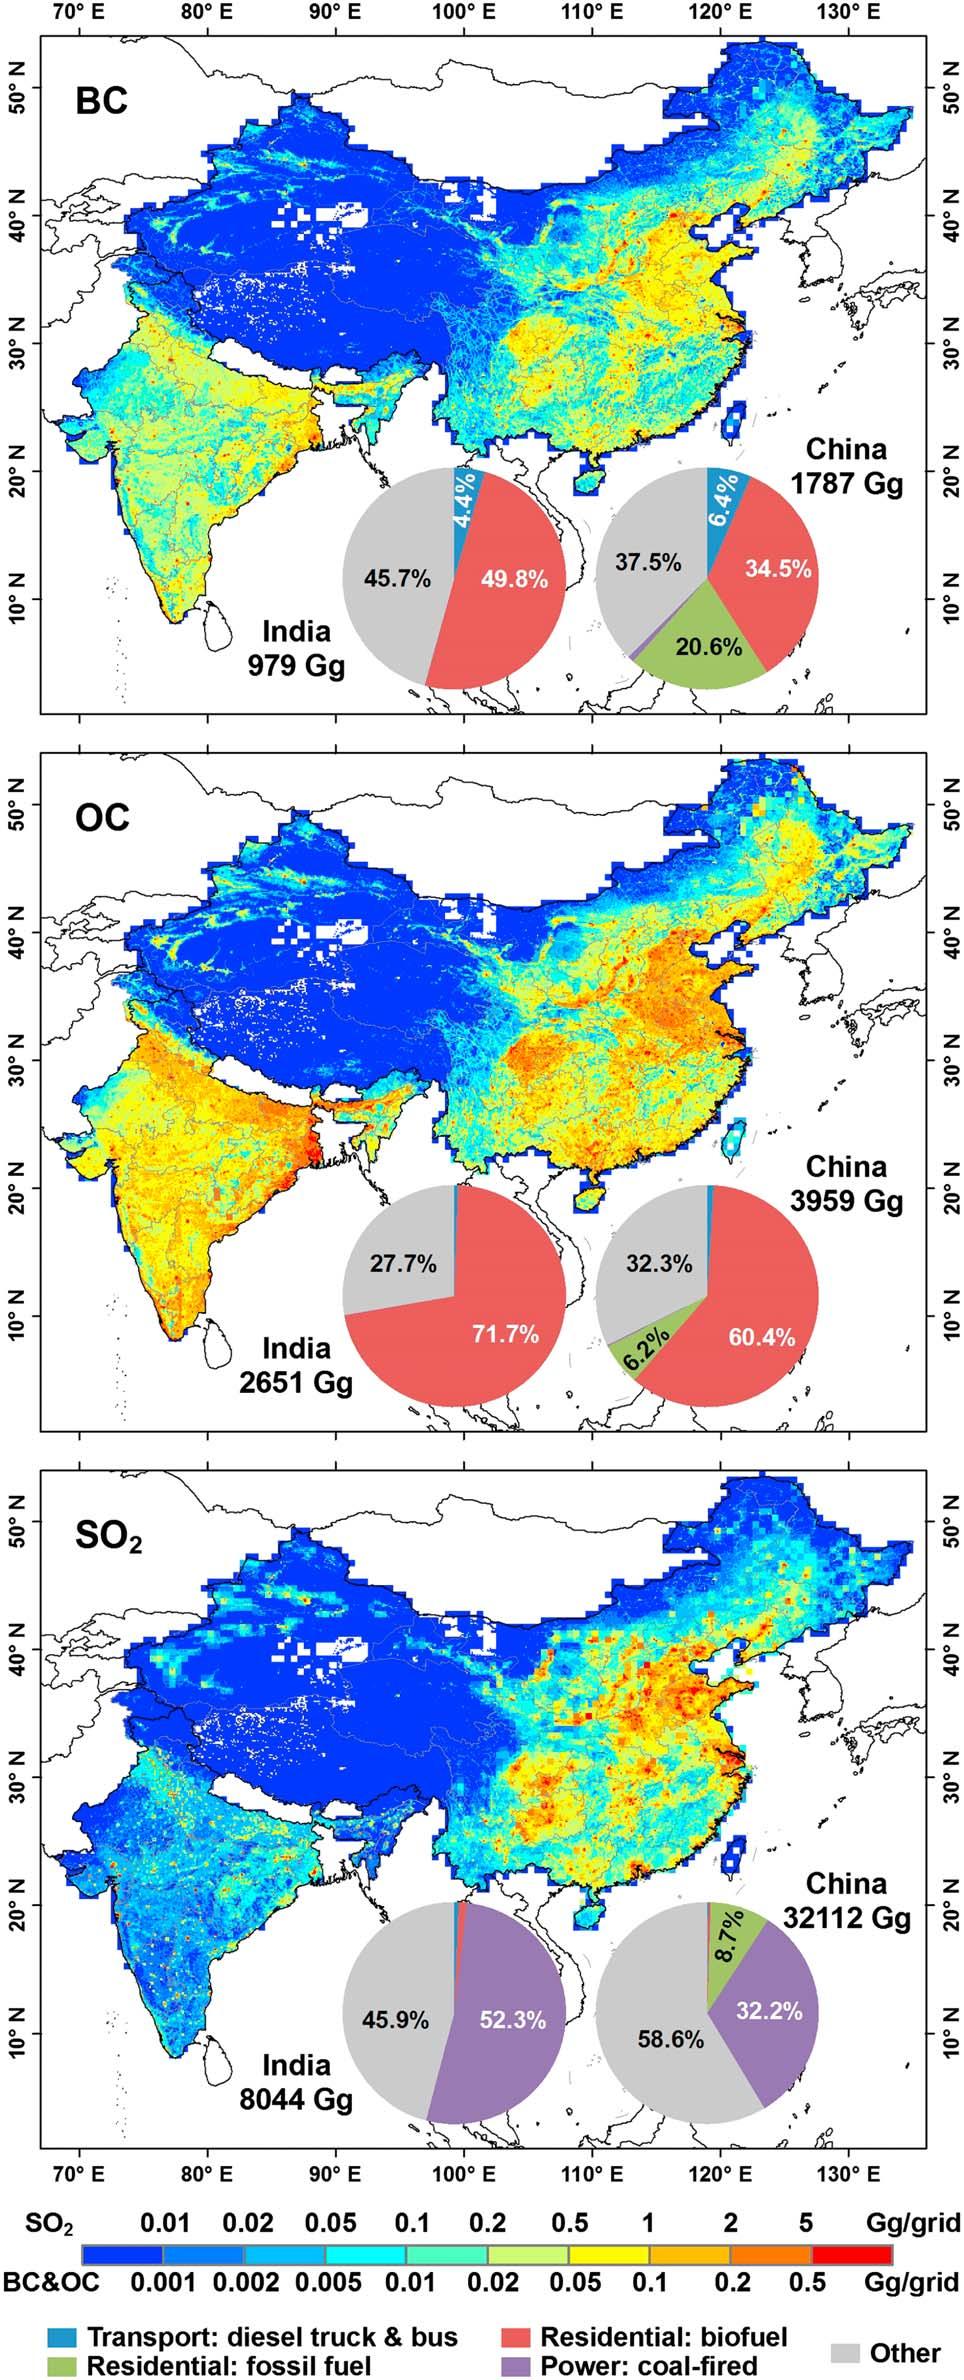 Figure 1. Emissions distributions in 2008 for China and India at 0.1 0.